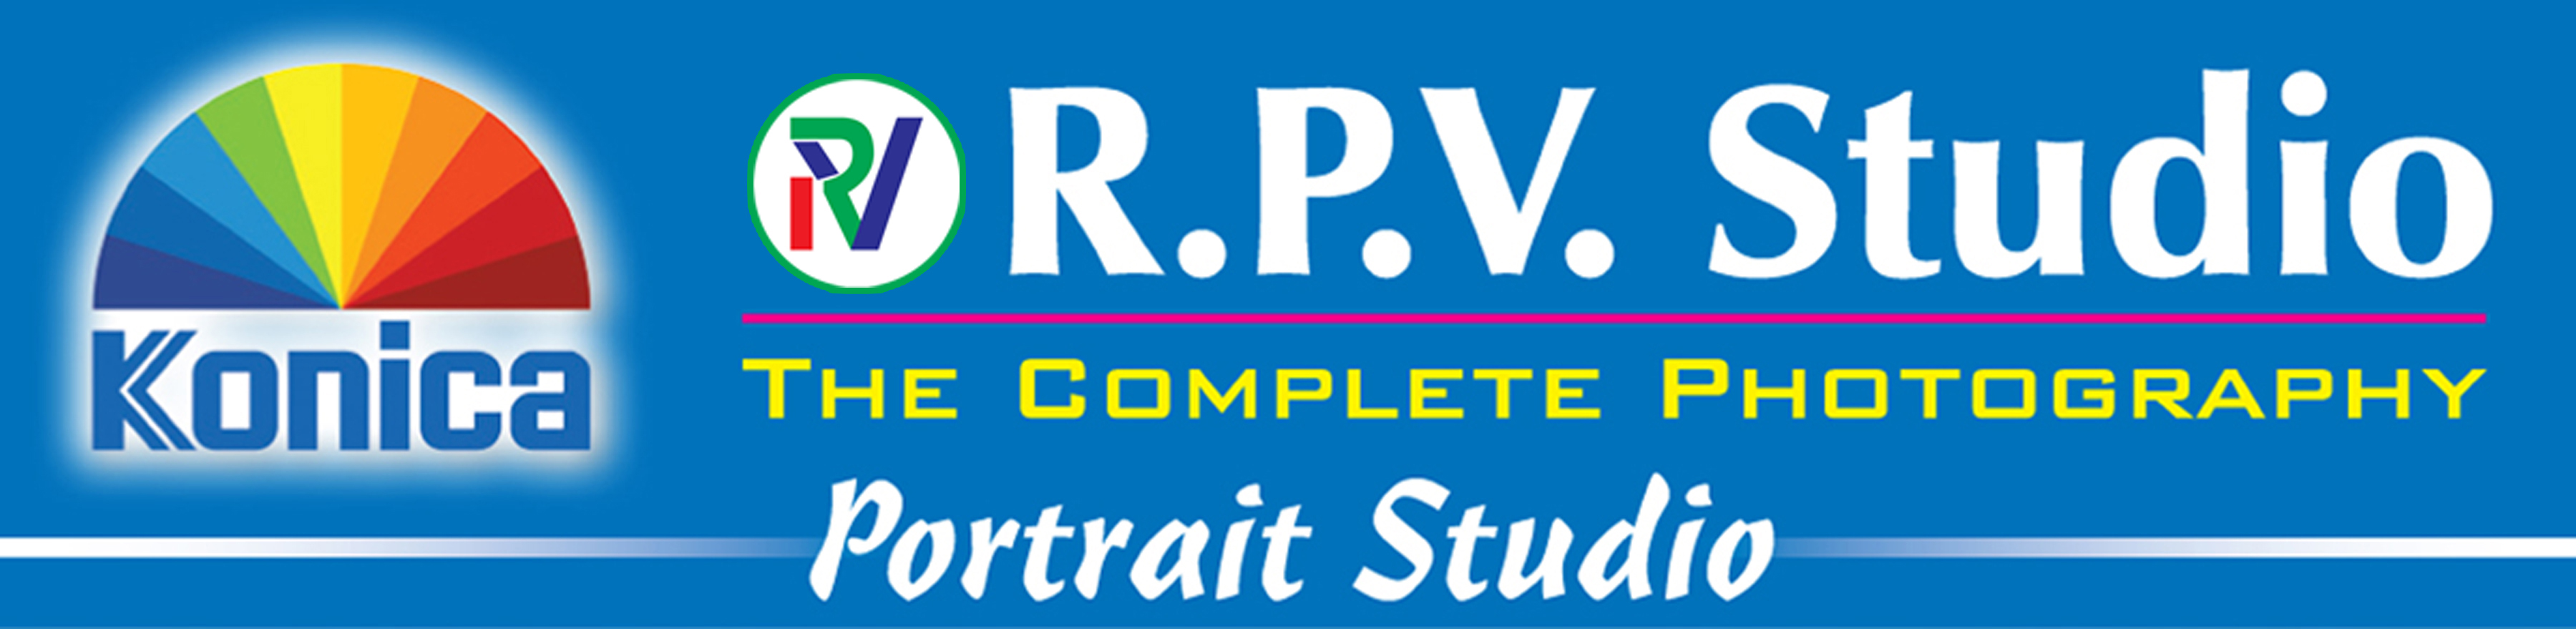 R.P.V. Studio|Catering Services|Event Services